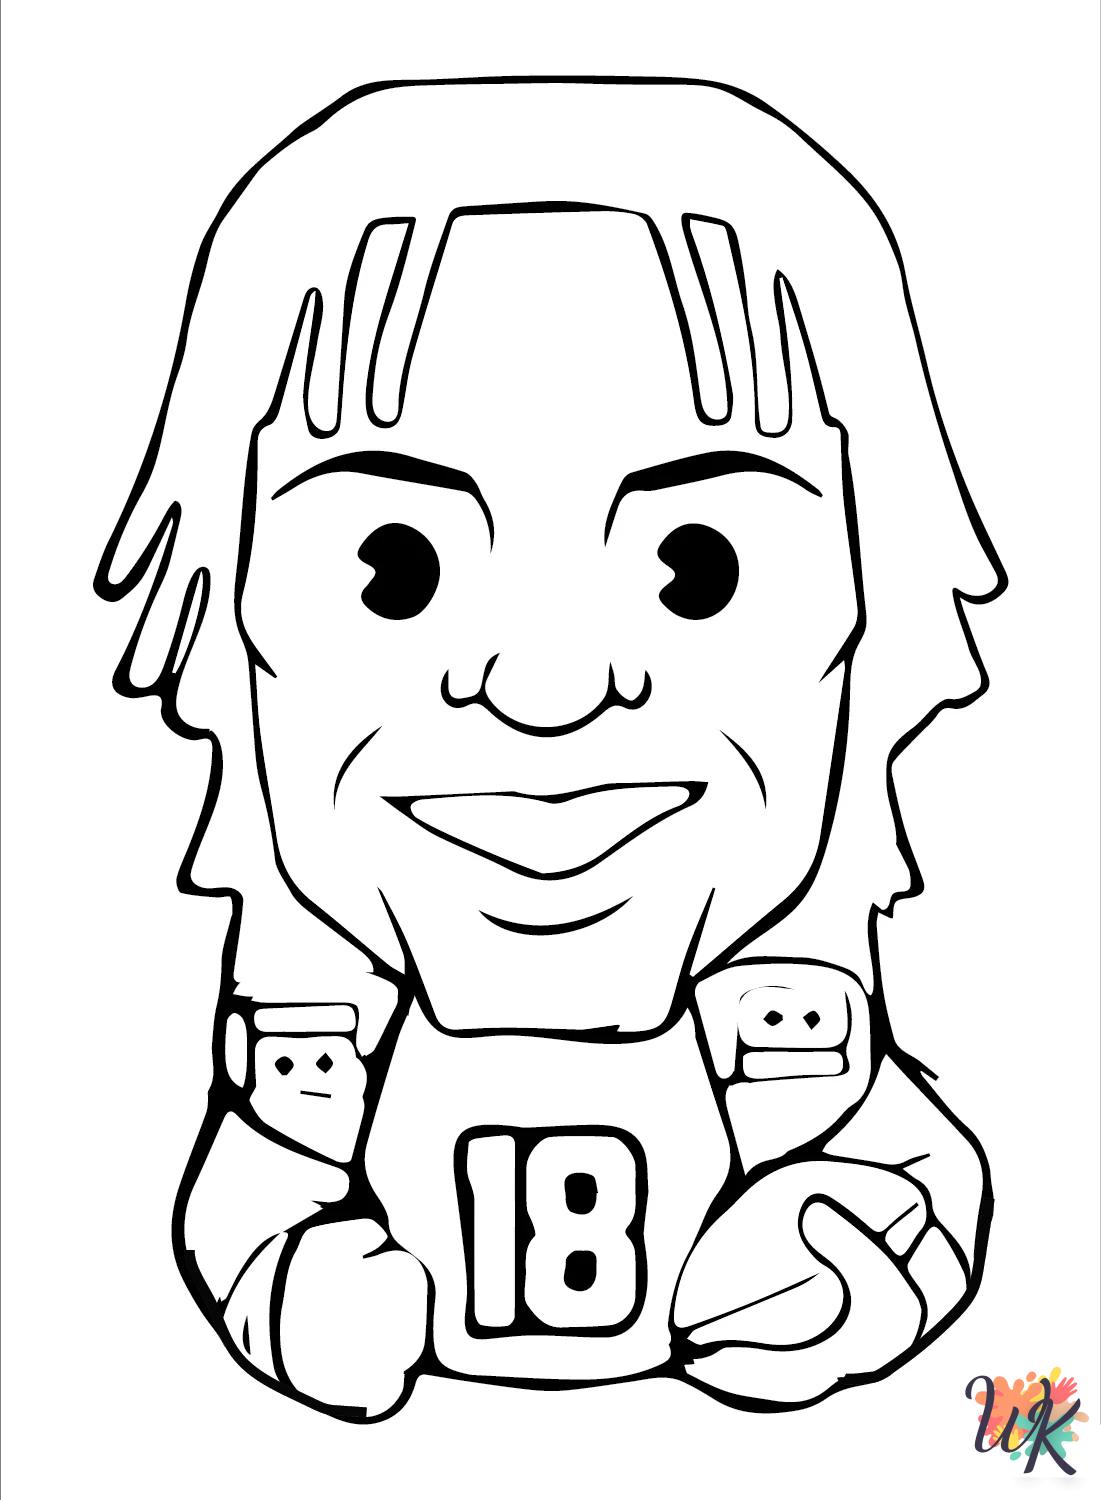 fun Justin Jefferson coloring pages